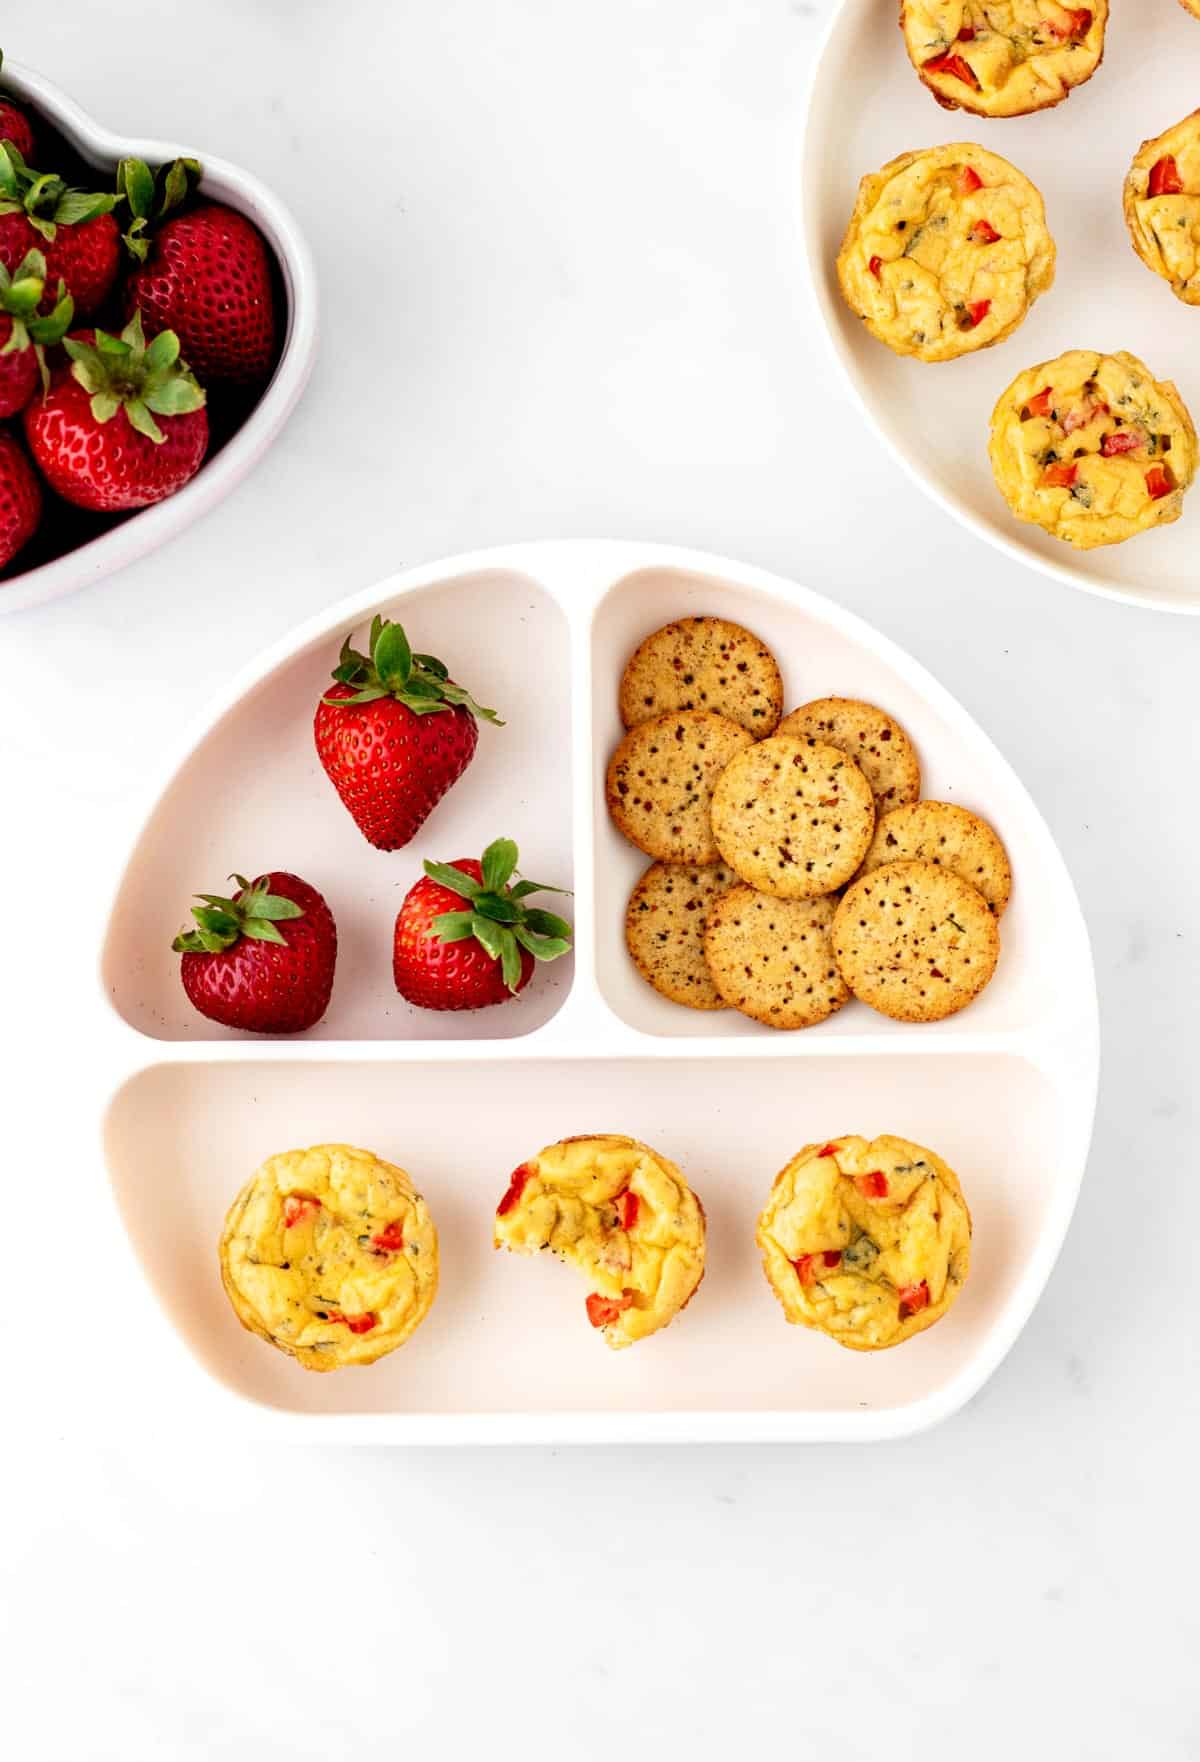 Three egg bites on a divided plate with crackers and strawberries.